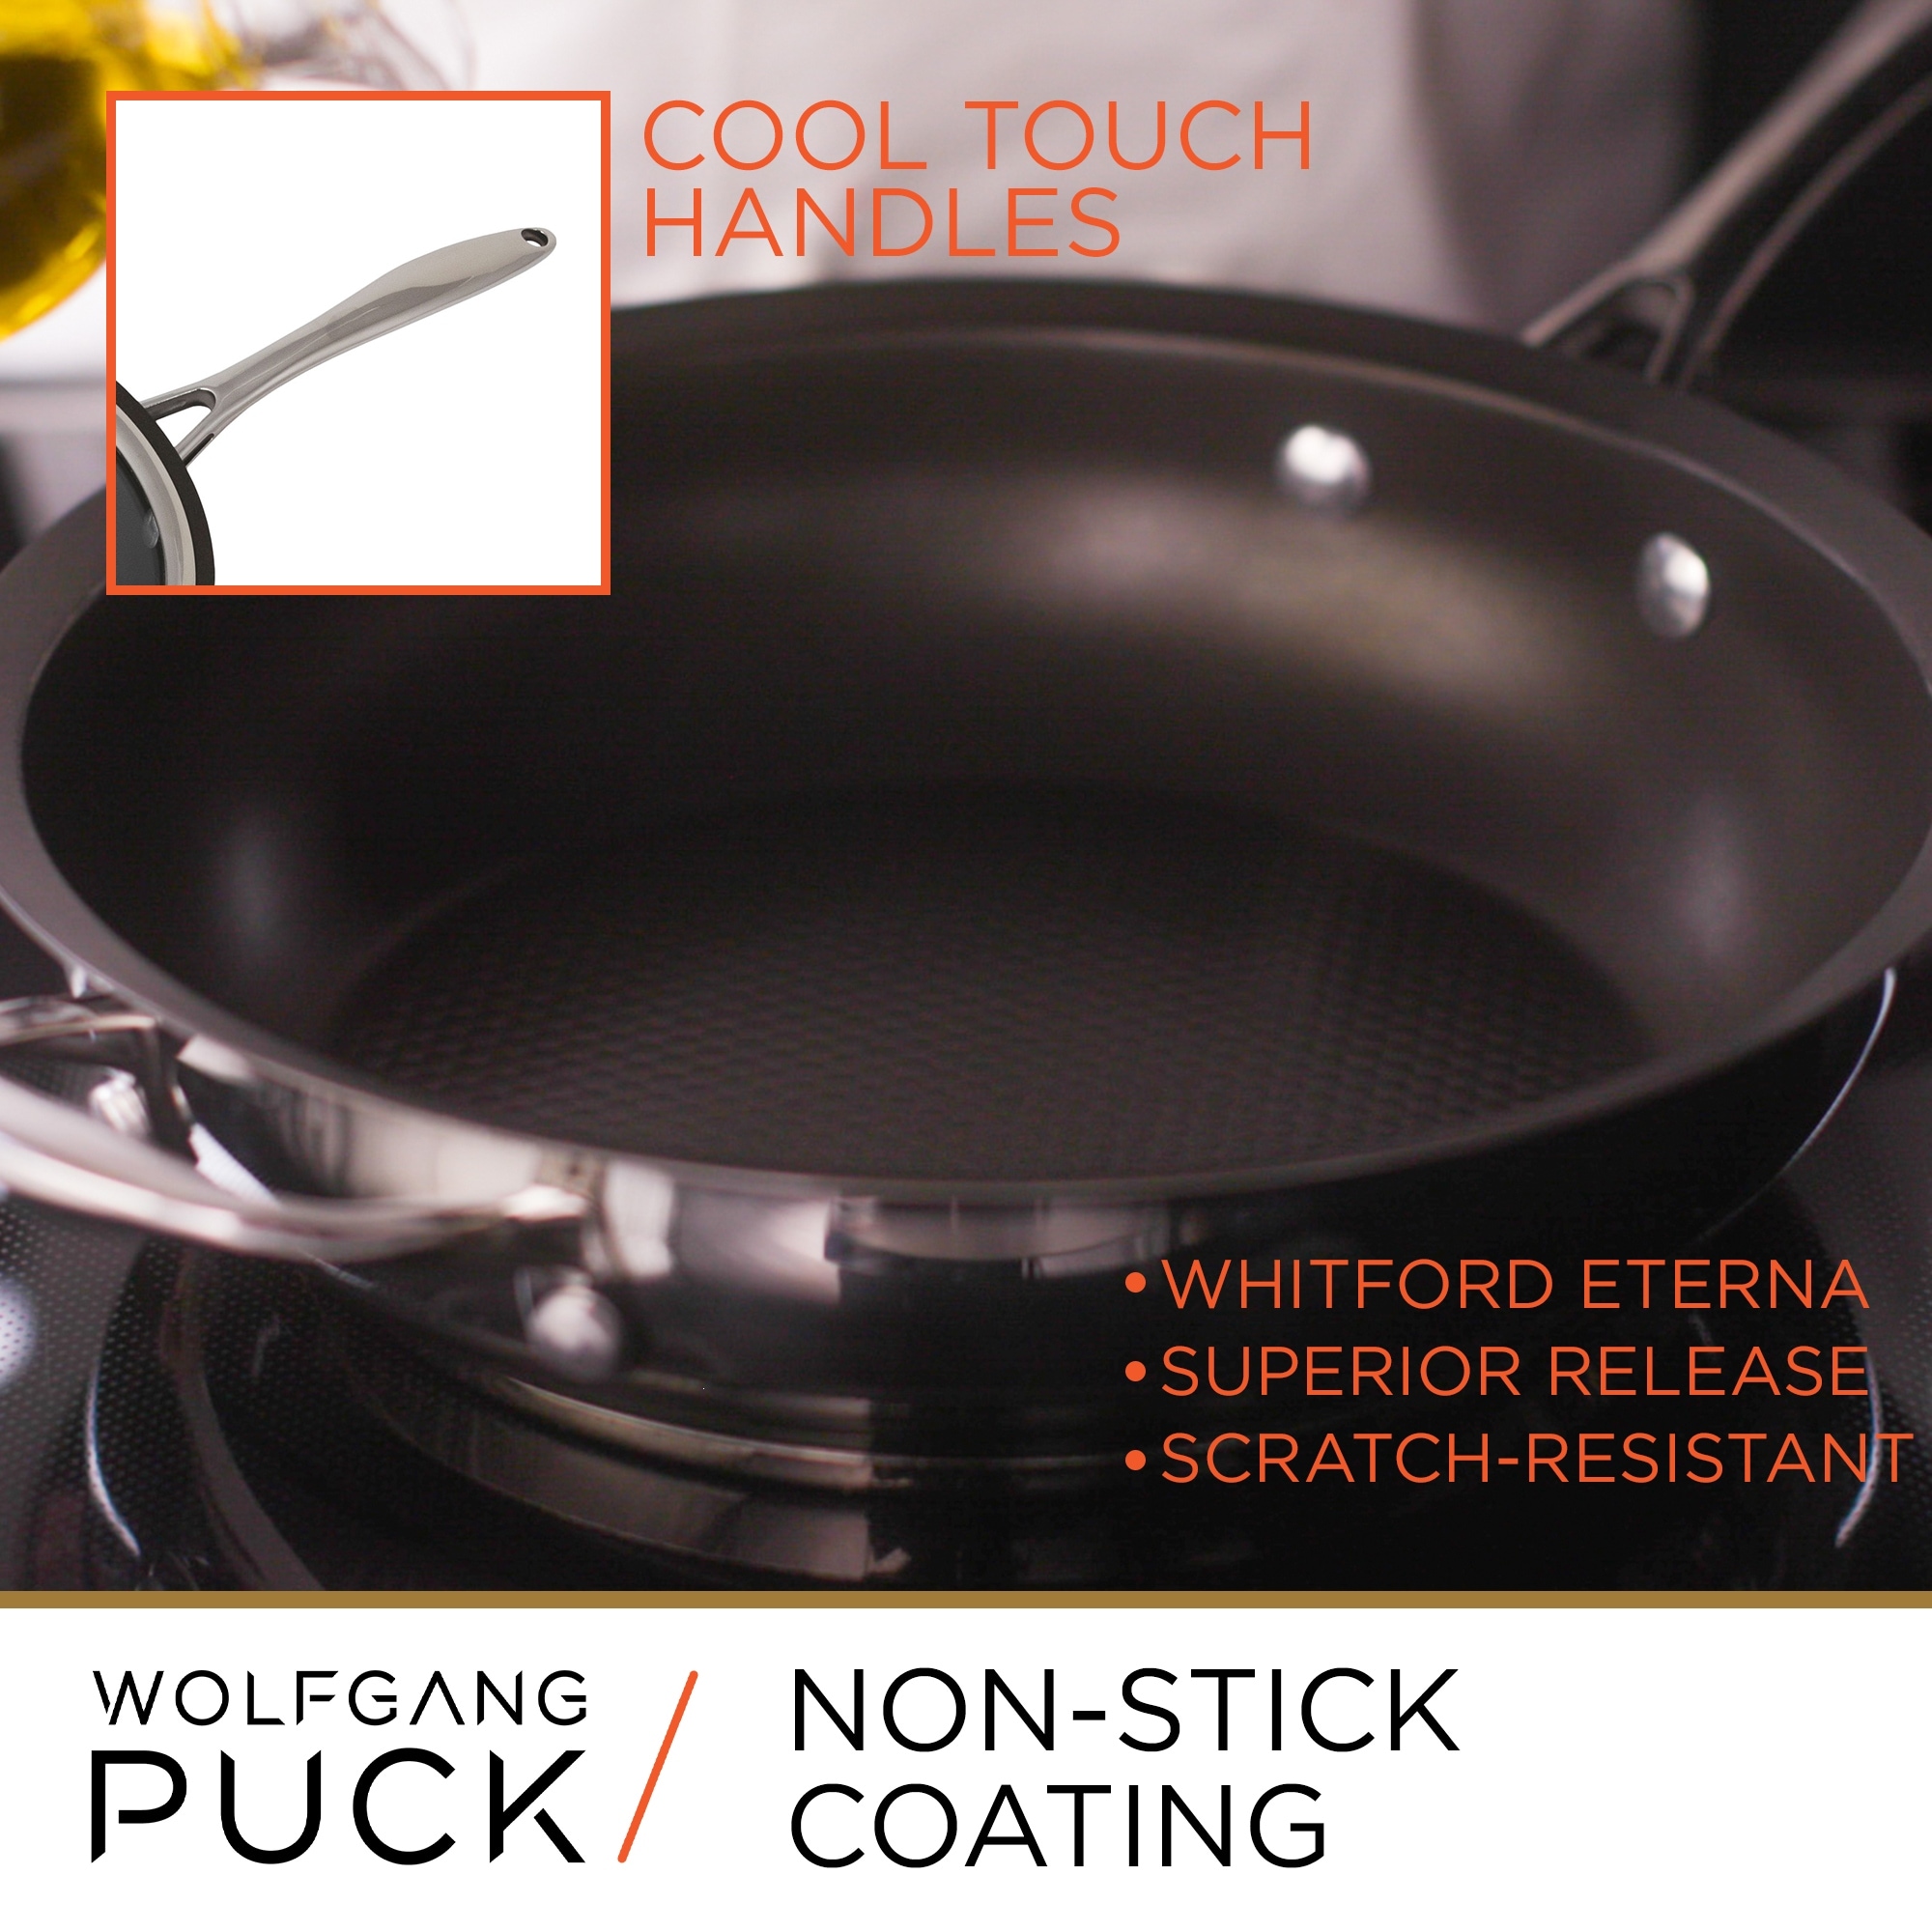 https://ak1.ostkcdn.com/images/products/is/images/direct/59397781d00f7307cc3f42d0ddc109b80f8e9e3f/Wolfgang-Puck-3-Piece-Stainless-Steel-Skillet-Set%2C-Scratch-Resistant-Non-Stick-Coating%2C-Includes-a-Large-and-Small-Skillet.jpg